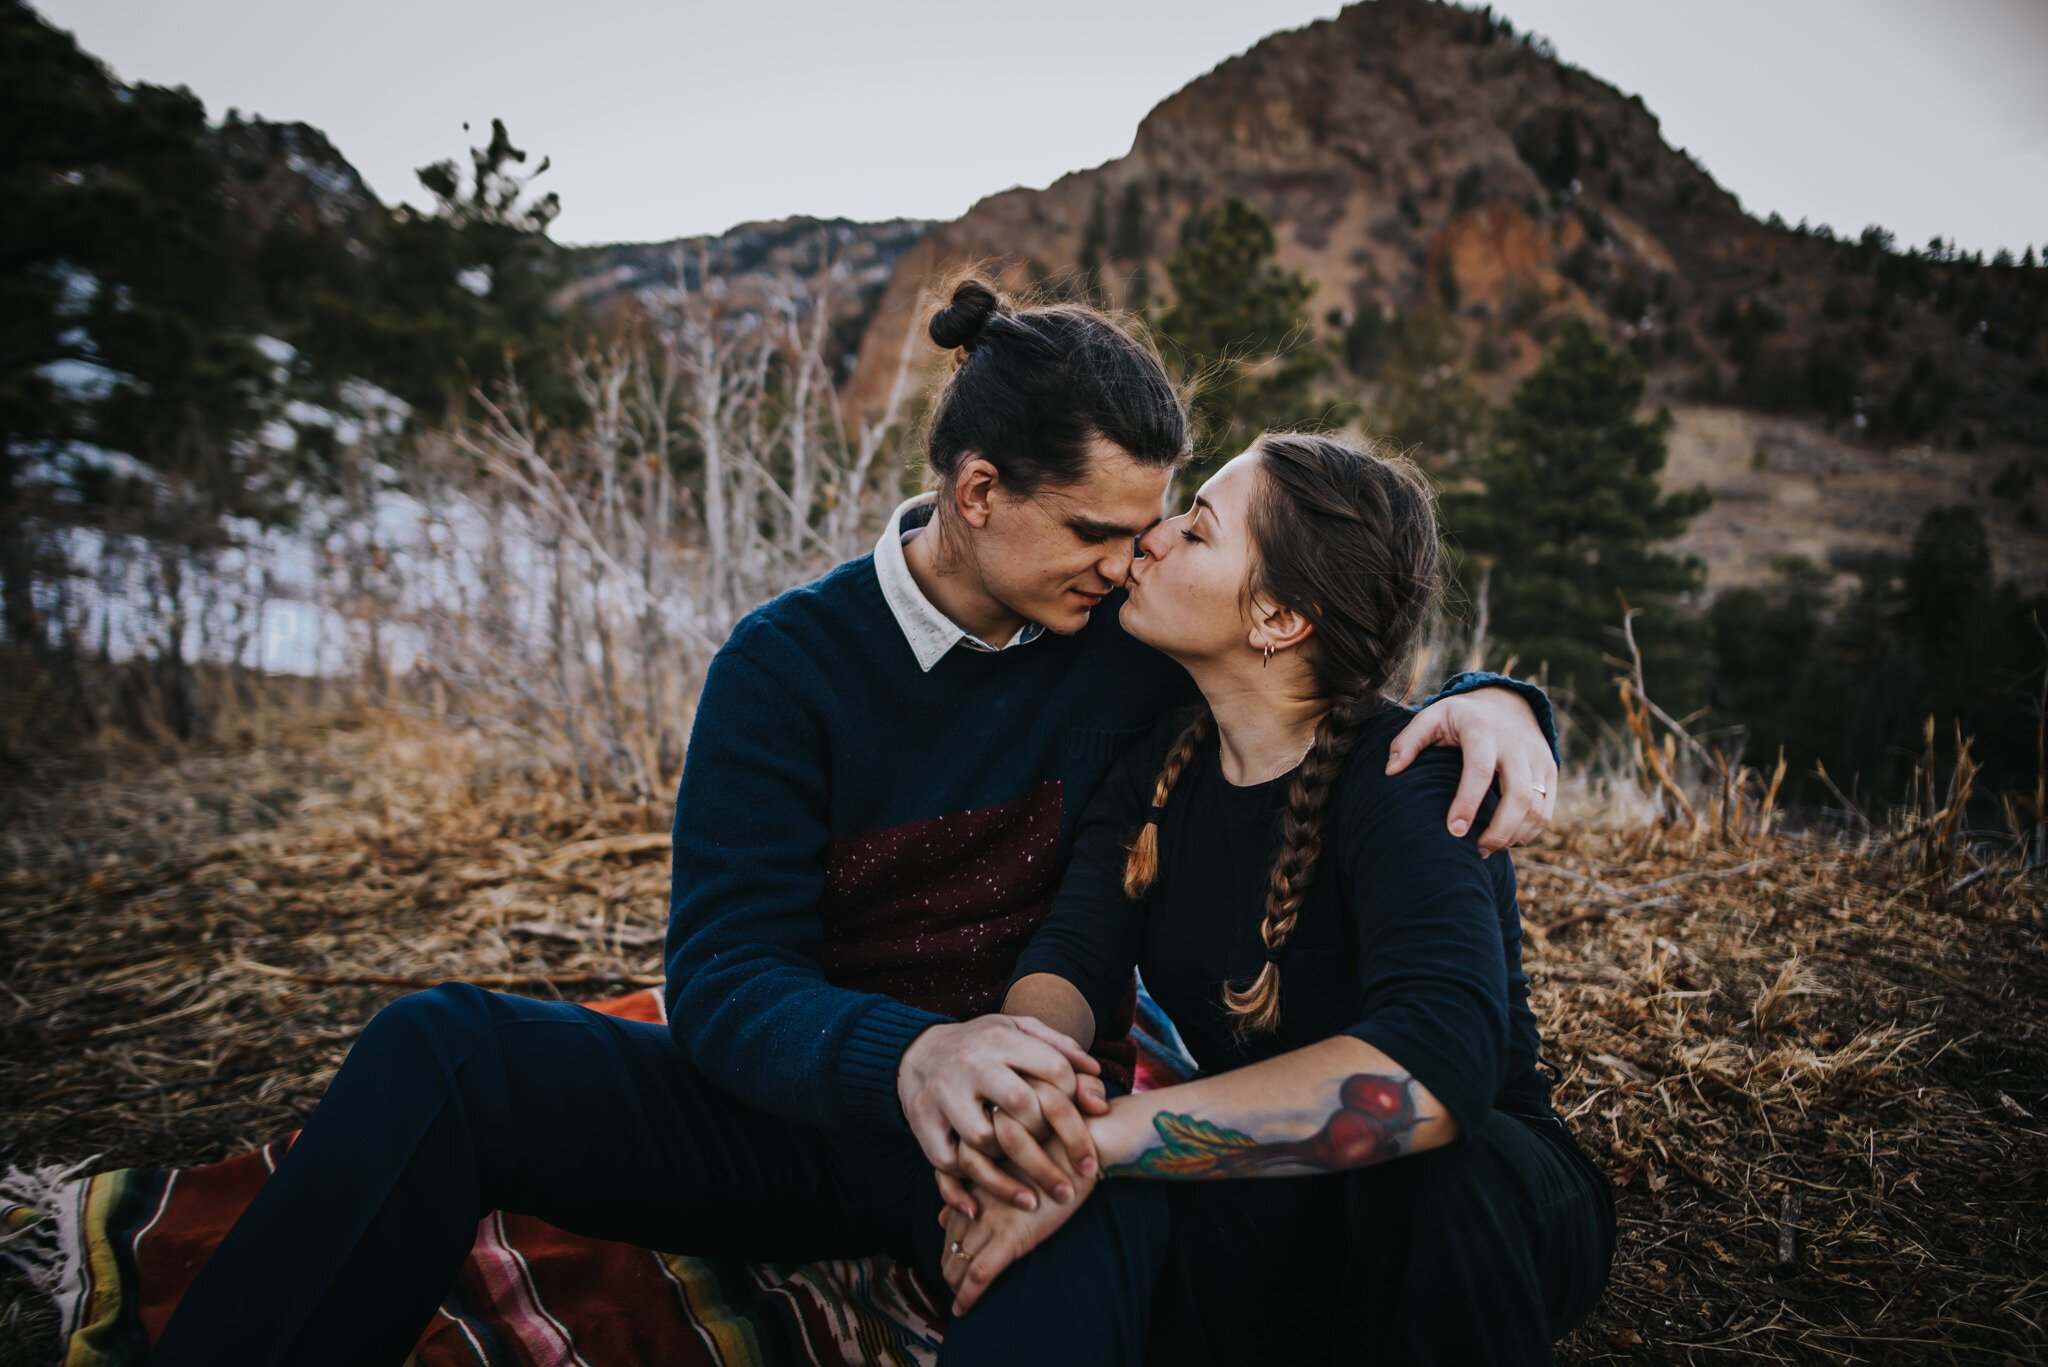 Yulia+and+Logan+Couples+Session+Colorado+Springs+Colorado+Sunset+Cheyenne+Canyon+Husband+Wife+Wild+Prairie+Photography-23-2020.jpeg